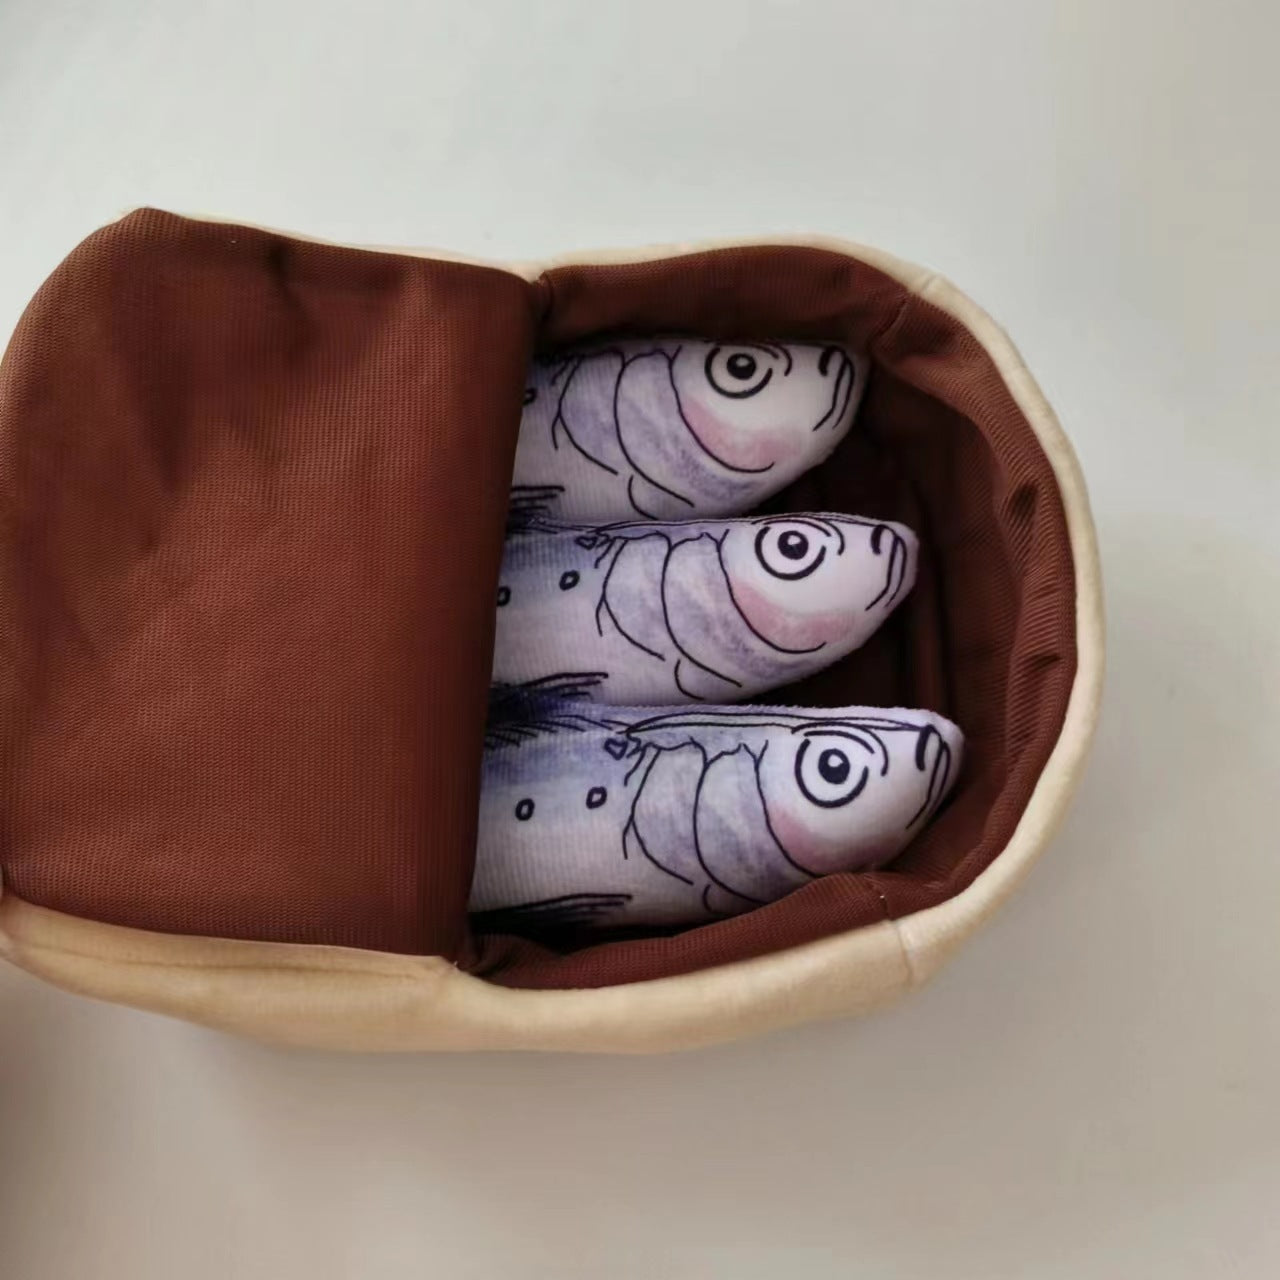 Moo - Sardine Can Hide-and-Seek Toy for Cats